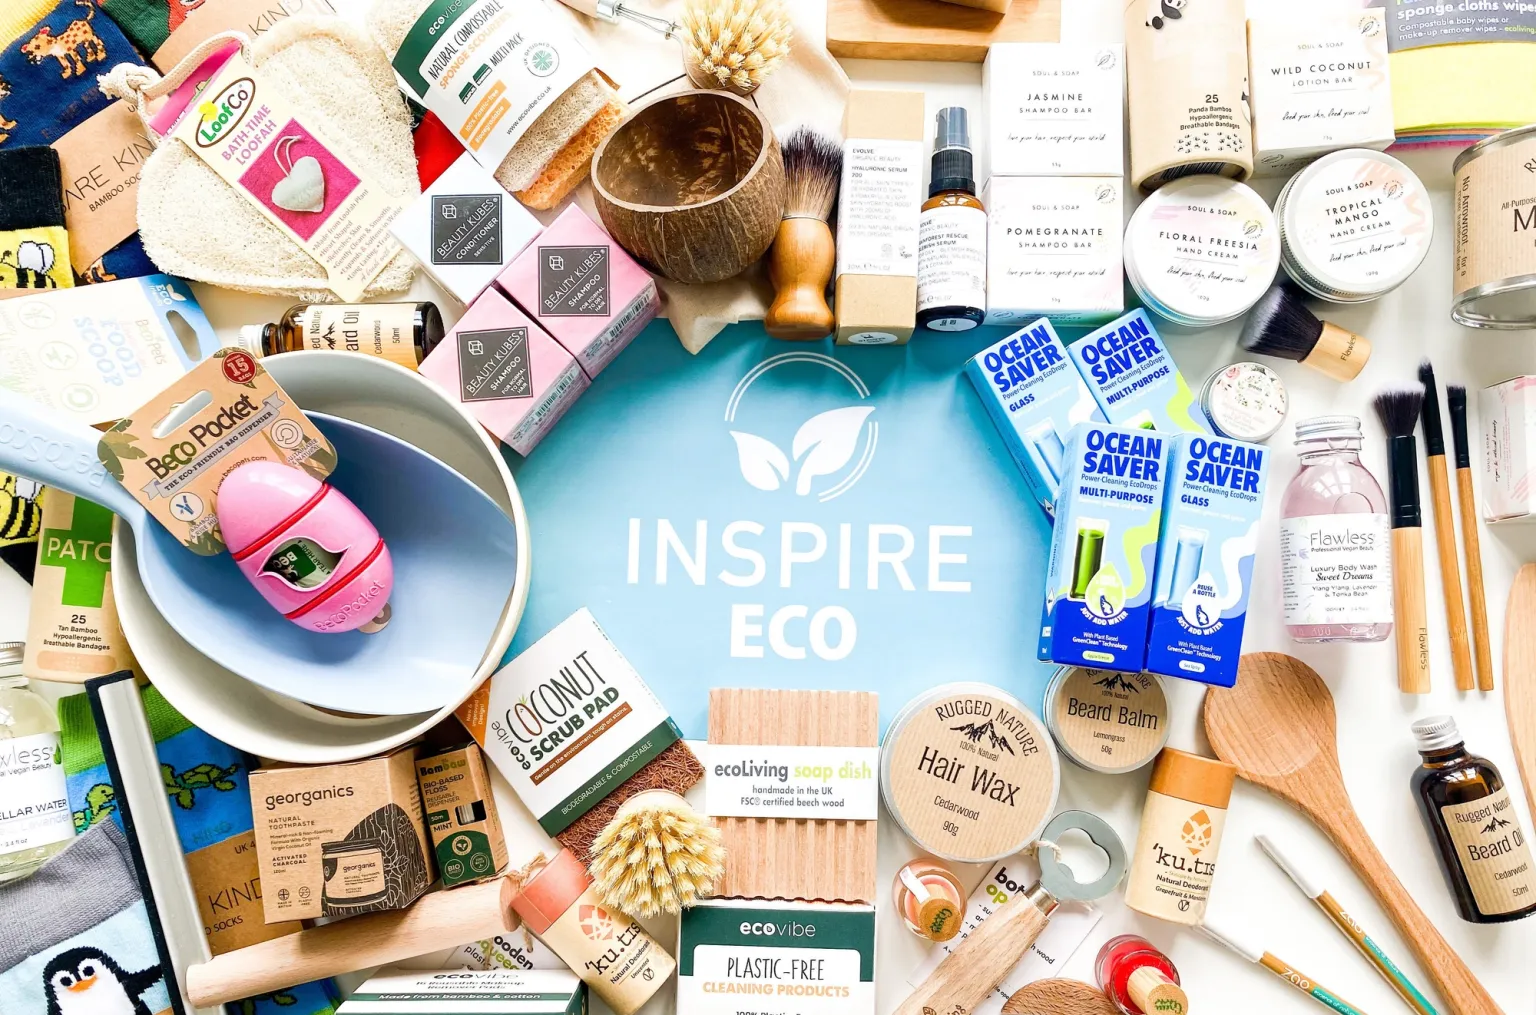 Inspire Eco is a one-stop-shop for environmentally kind and ethically sourced products. Inspire Eco only sell products that have personally supported their own journey towards a more sustainable lifestyle, meaning you can rest assured that every product is fit for purpose. They stock some of the most reputable & trustworthy eco-friendly brands and help you make sustainable swaps for the following lifestyle needs; health & beauty, homeware, cleaning, pets, gift sets and more!